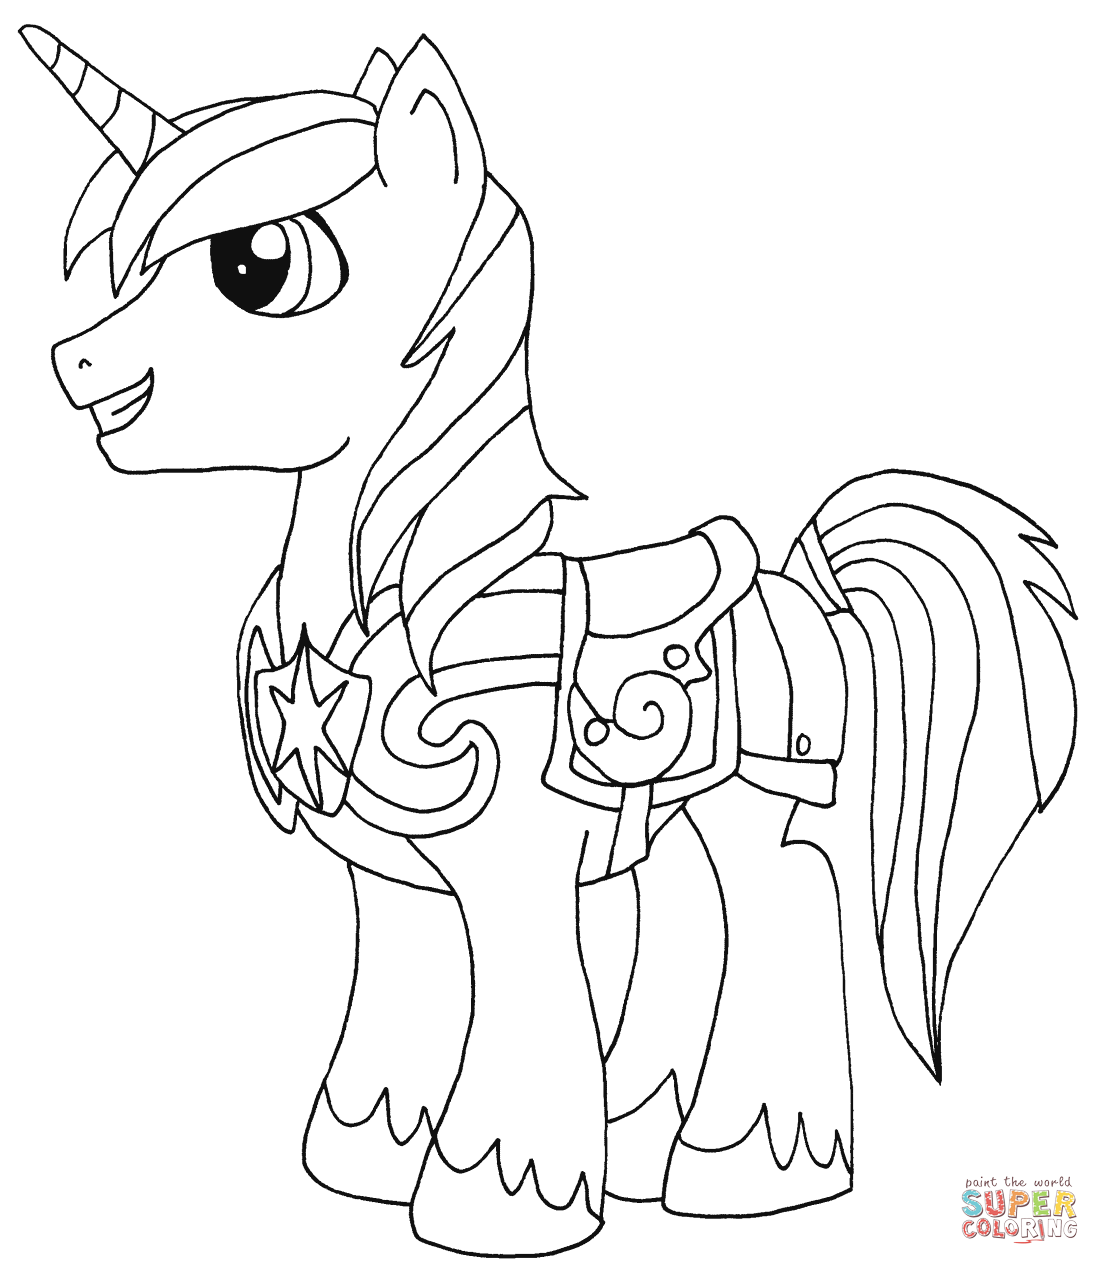 Shining armor coloring page free printable coloring pages